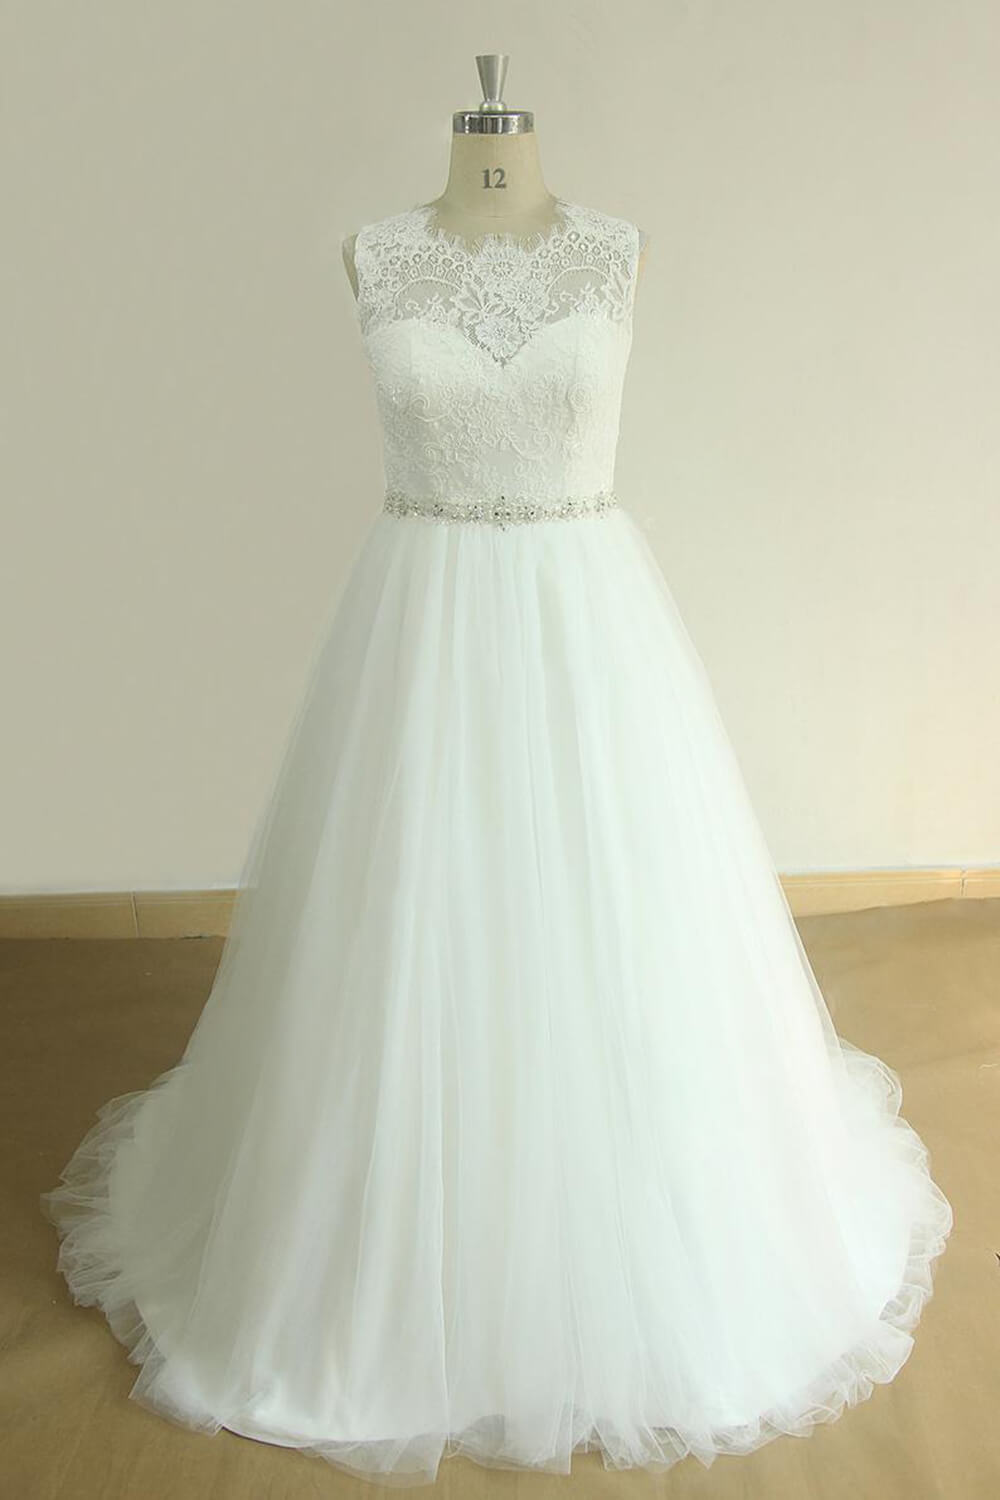 Load image into Gallery viewer, Unique Jewel Sleeveless Lace Wedding Dresses White A-line Tulle Bridal Gowns On Sale-27dress
